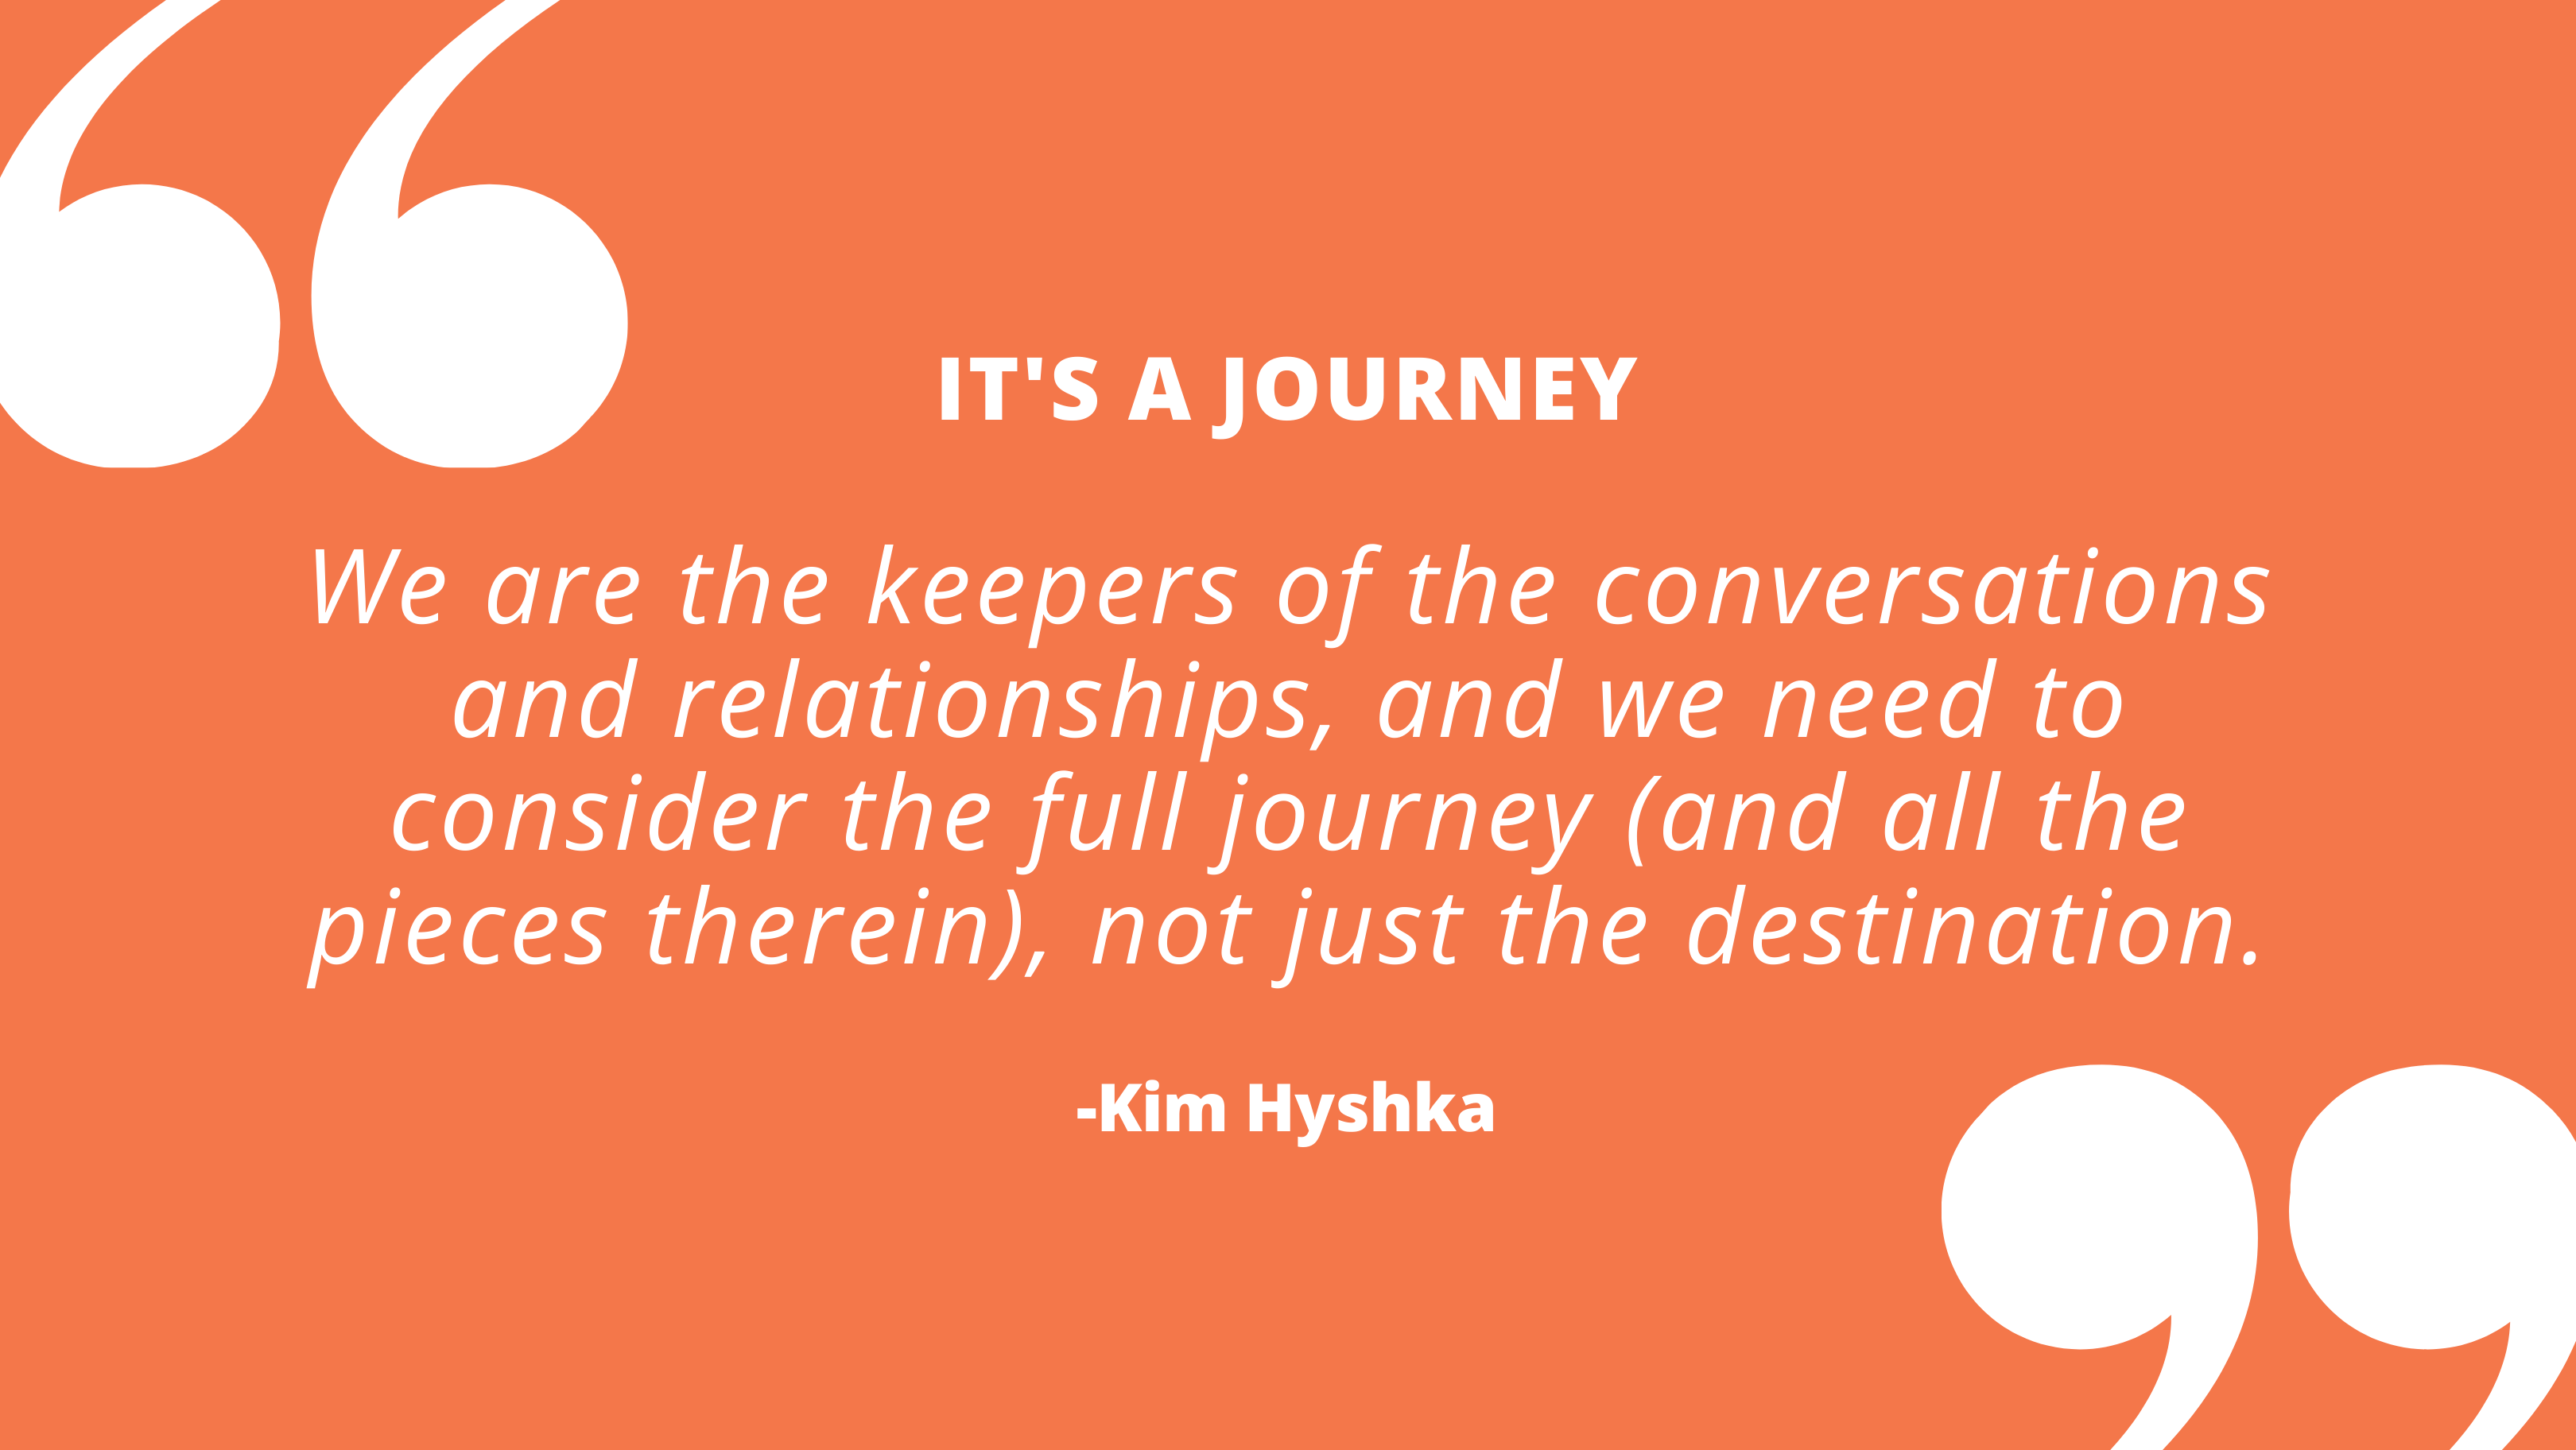 We are the keepers of the conversations and relationships, and we need to consider the full journey (and all the pieces therein), not just the destination. -- Kim Hyshka, Dialogue Partners